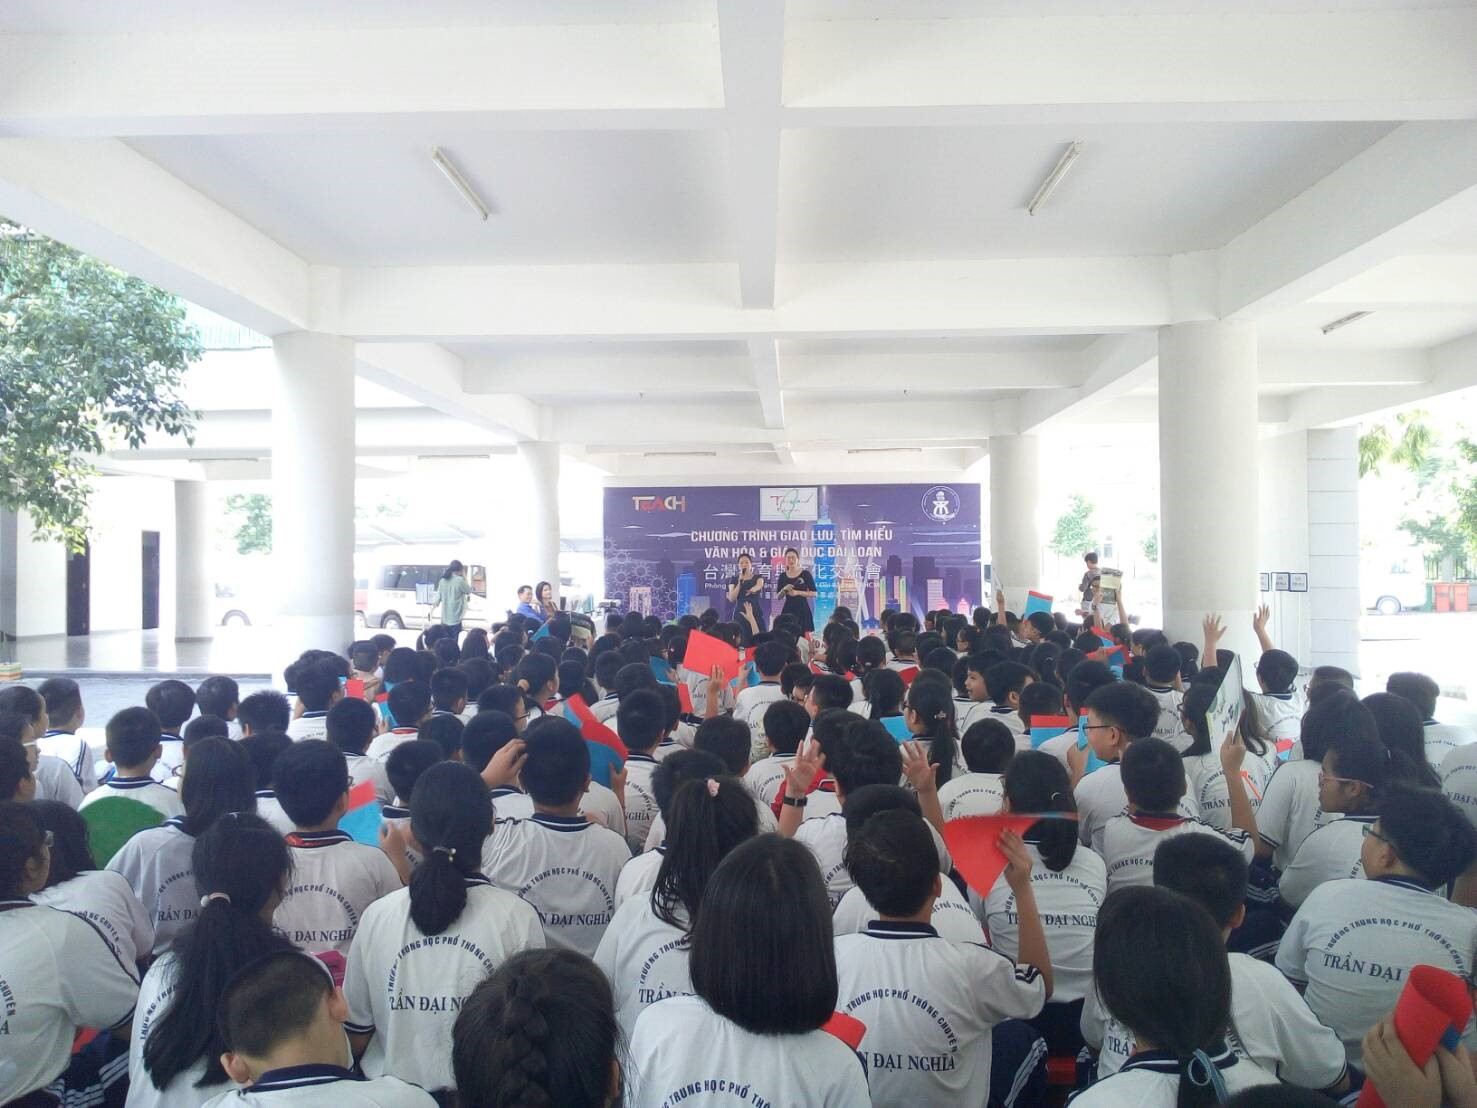 Taiwan Education and Culture Seminar for Students at Tran Dai Nghia Junior High School for the Gifted in Ho Chi Minh